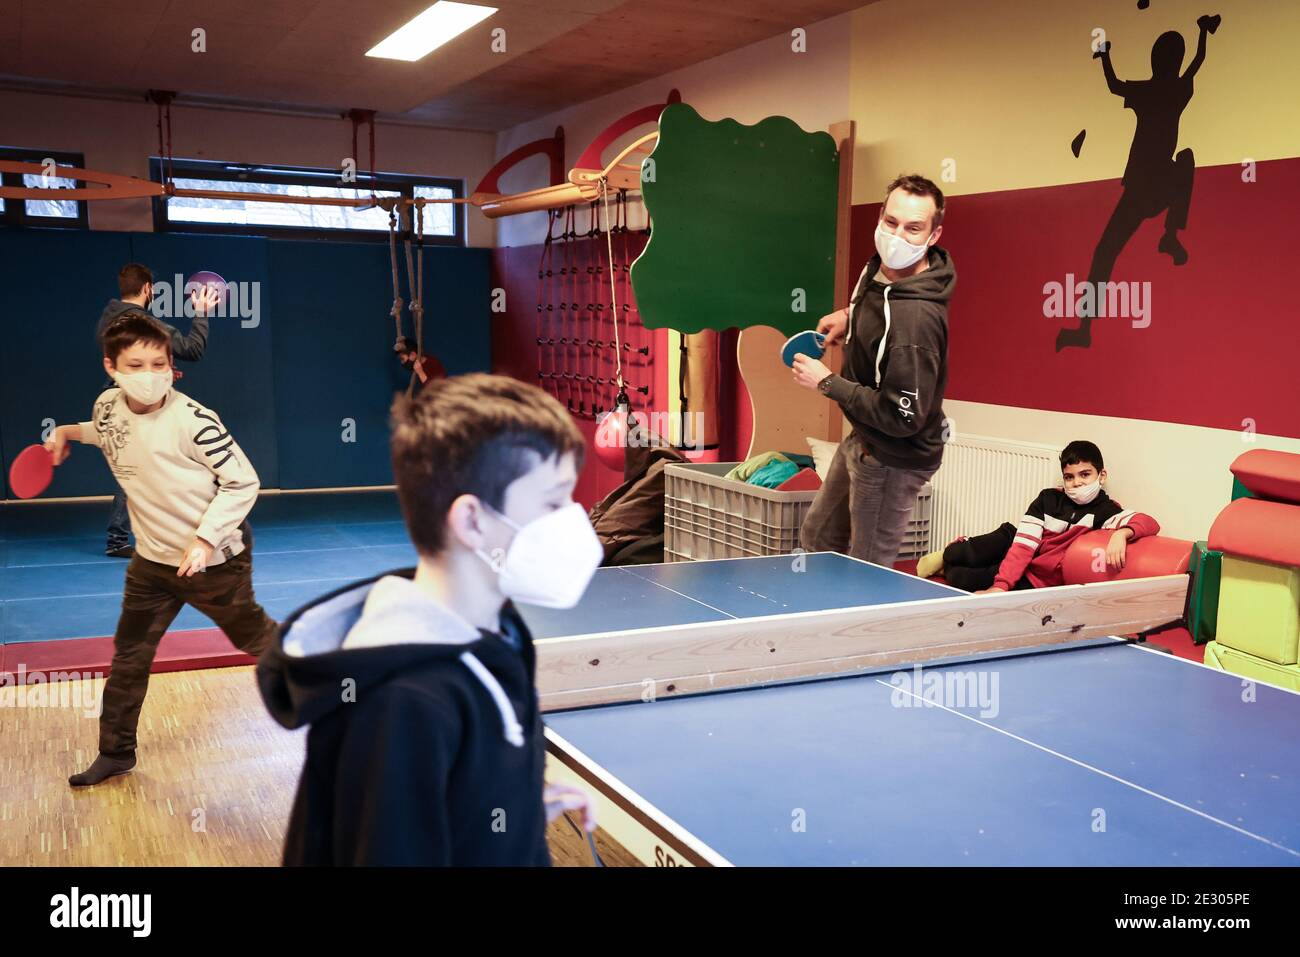 Hamburg, Germany. 15th Jan, 2021. Tobias Lucht, regional director of Arche  Hamburg, plays table tennis with three boys in the sports room of the Arche  children's project in Hamburg-Jenfeld. The lockdown due